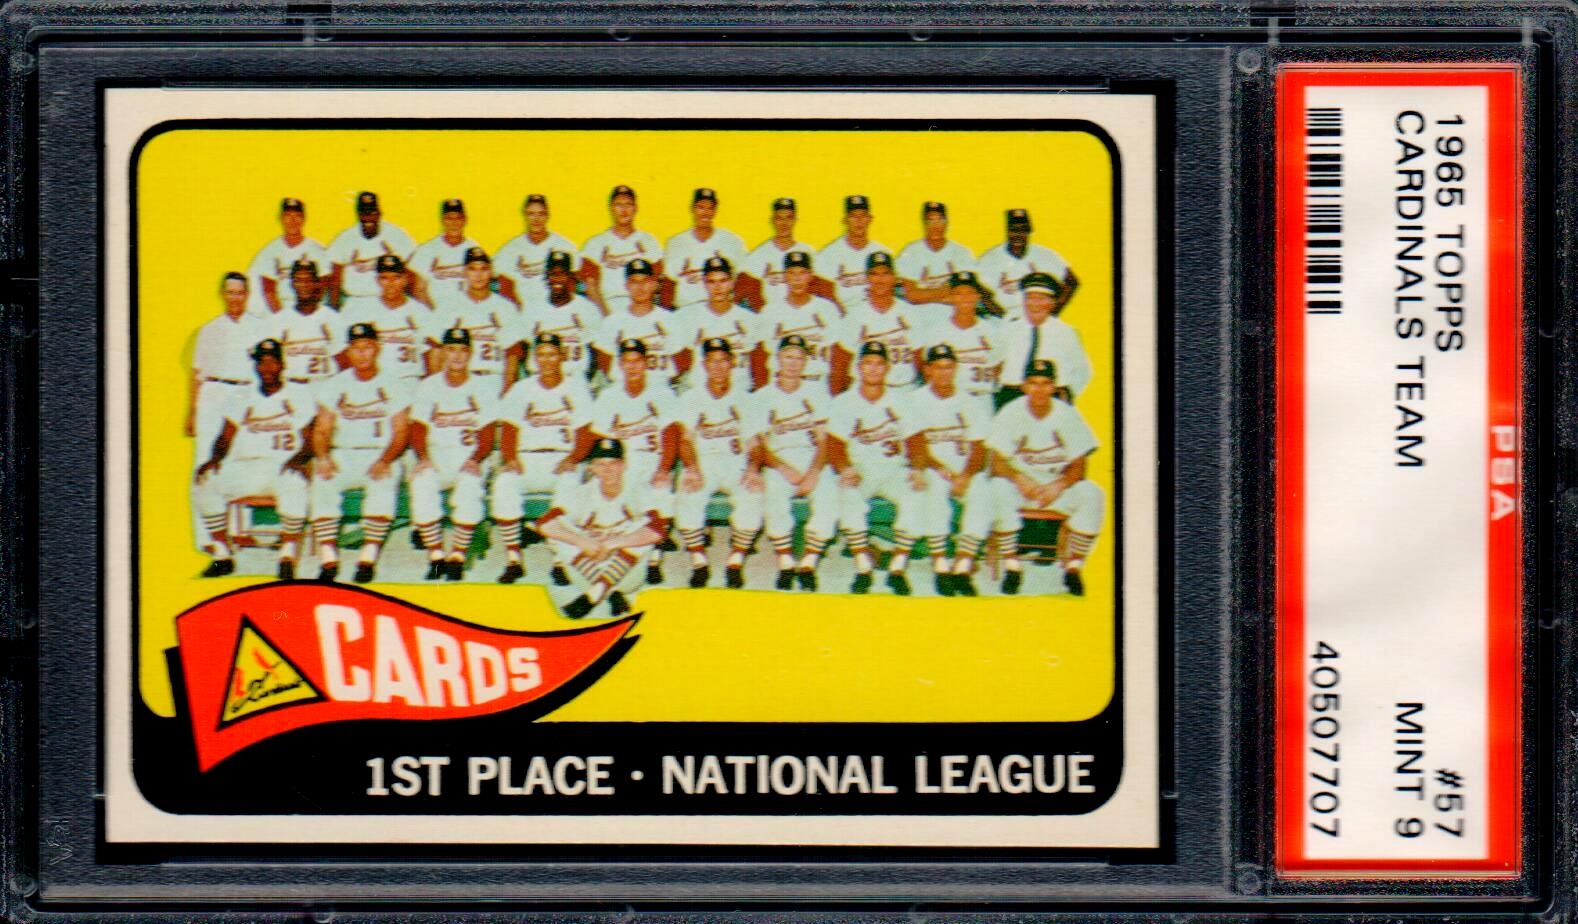 Baseball - 1965 Topps St. Louis Cardinals: The MLB Collection of Defending Champs Set Image Gallery